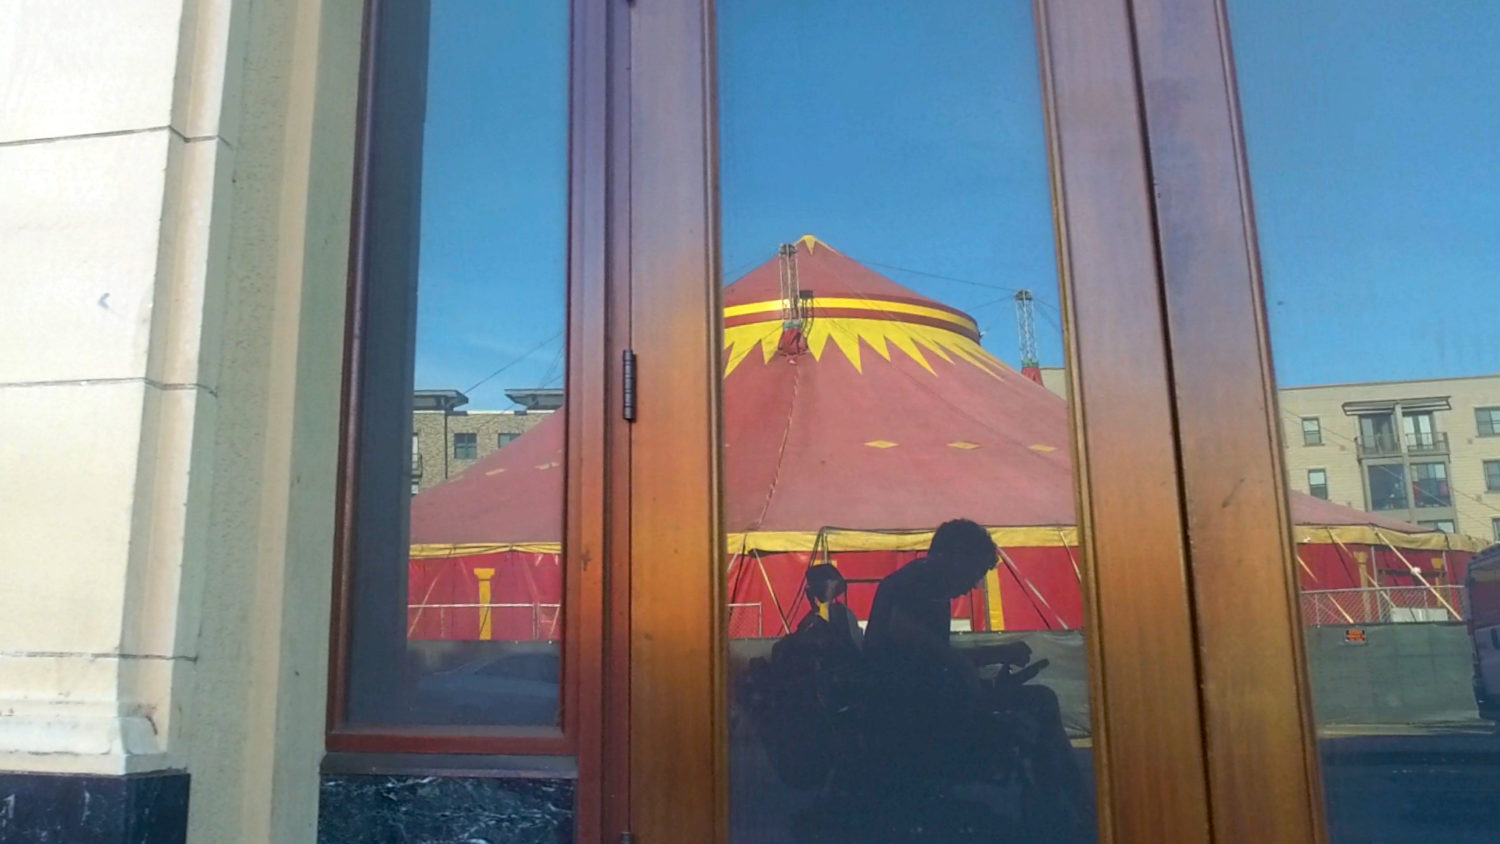 ] In a reflection of an unmarked storefront is a grayish silhouette of a man using an electric wheelchair. Behind the man is a spectacular red and yellow circus tent.